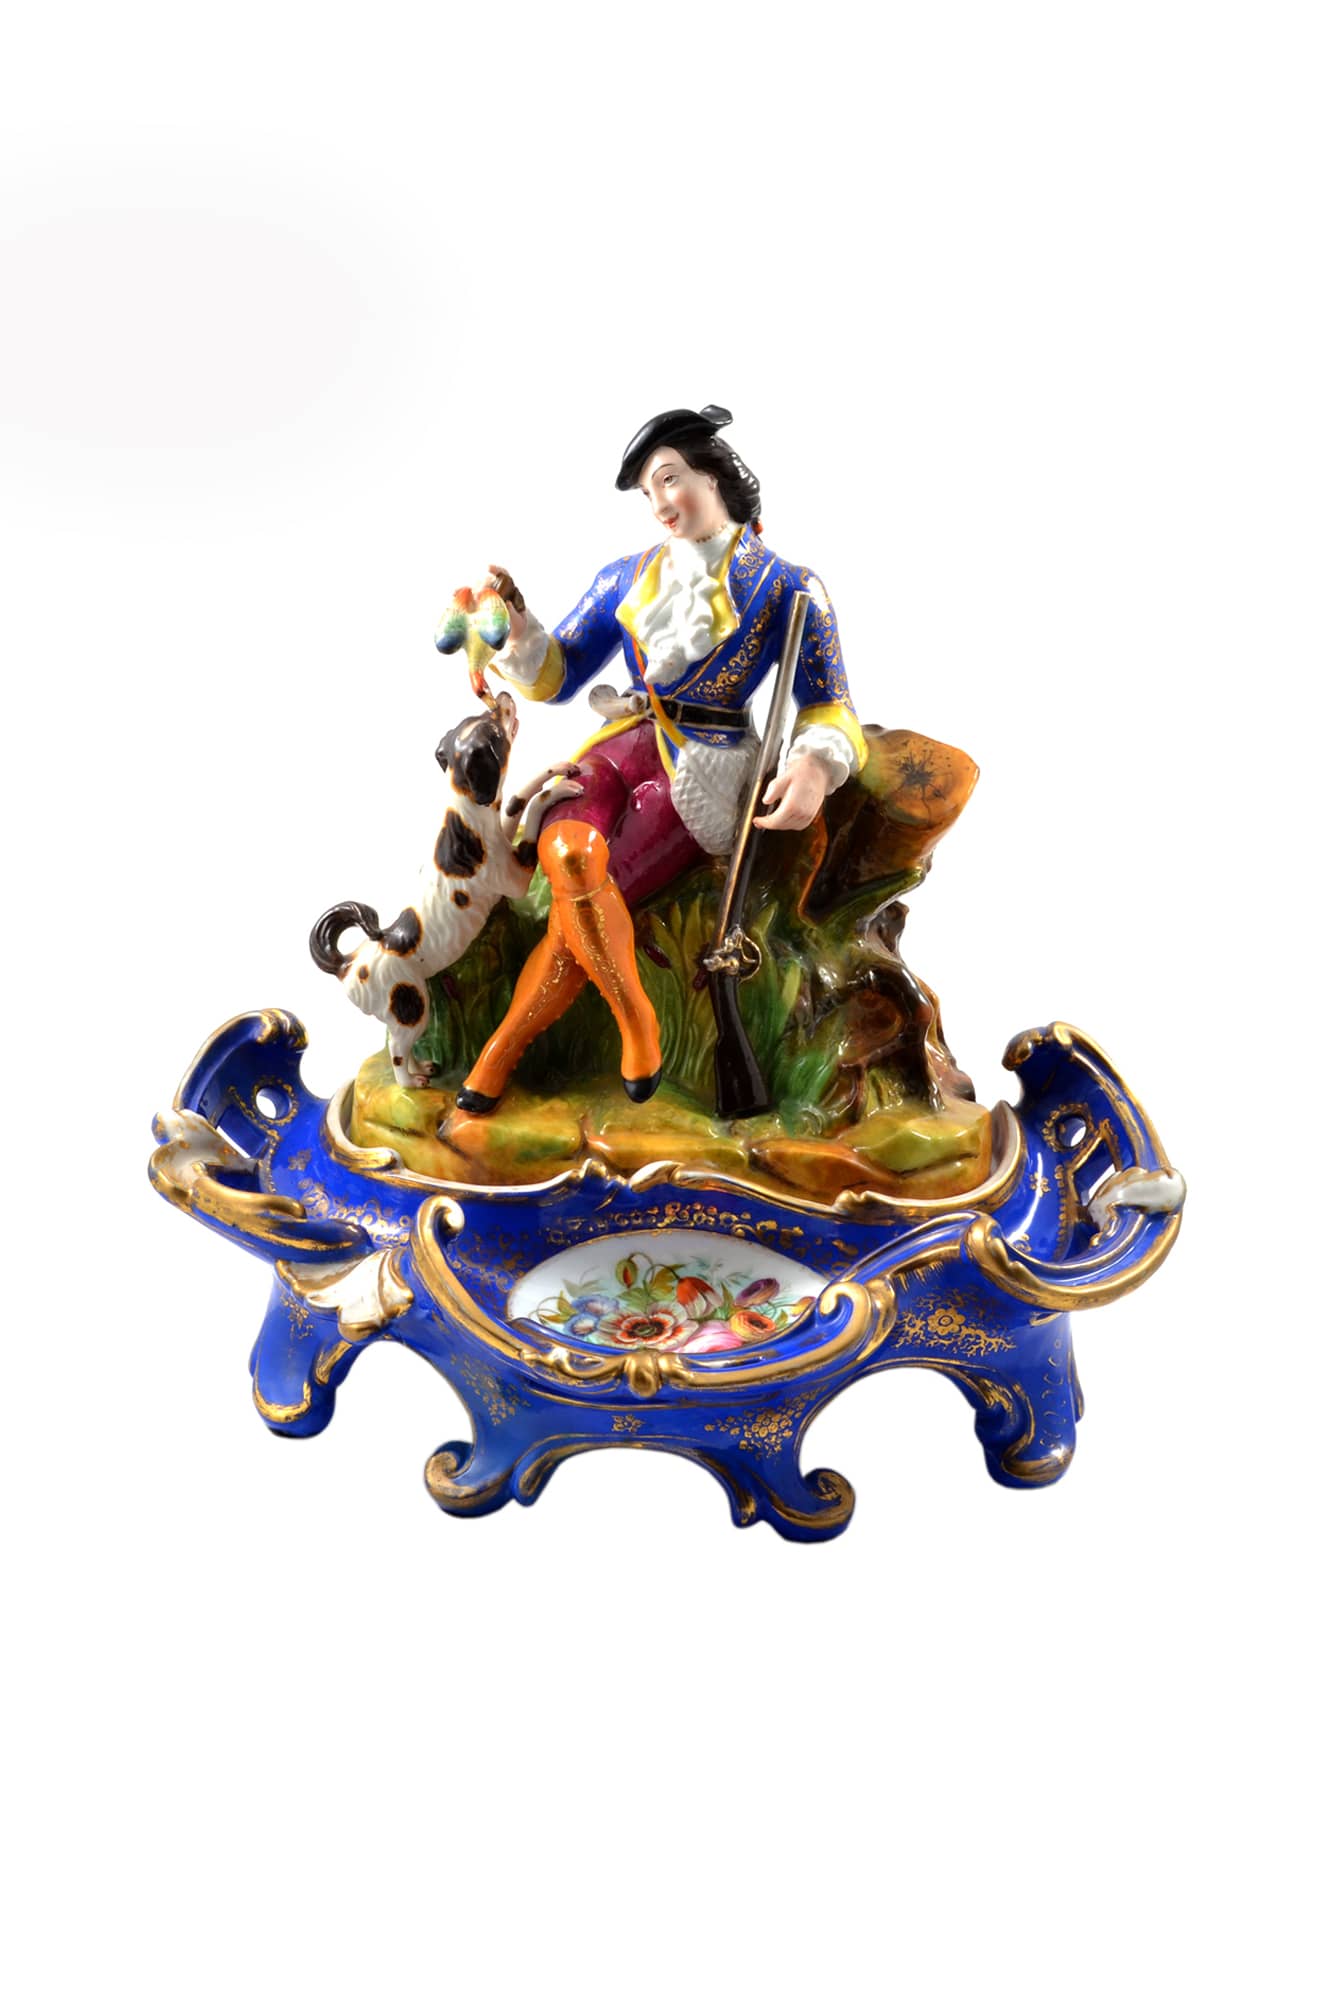 Antique Porcelain Figural Large Inkwell with Sand Shaker and Desk Tray, Old  Paris France Early 19th Century - Shop LR Antiques